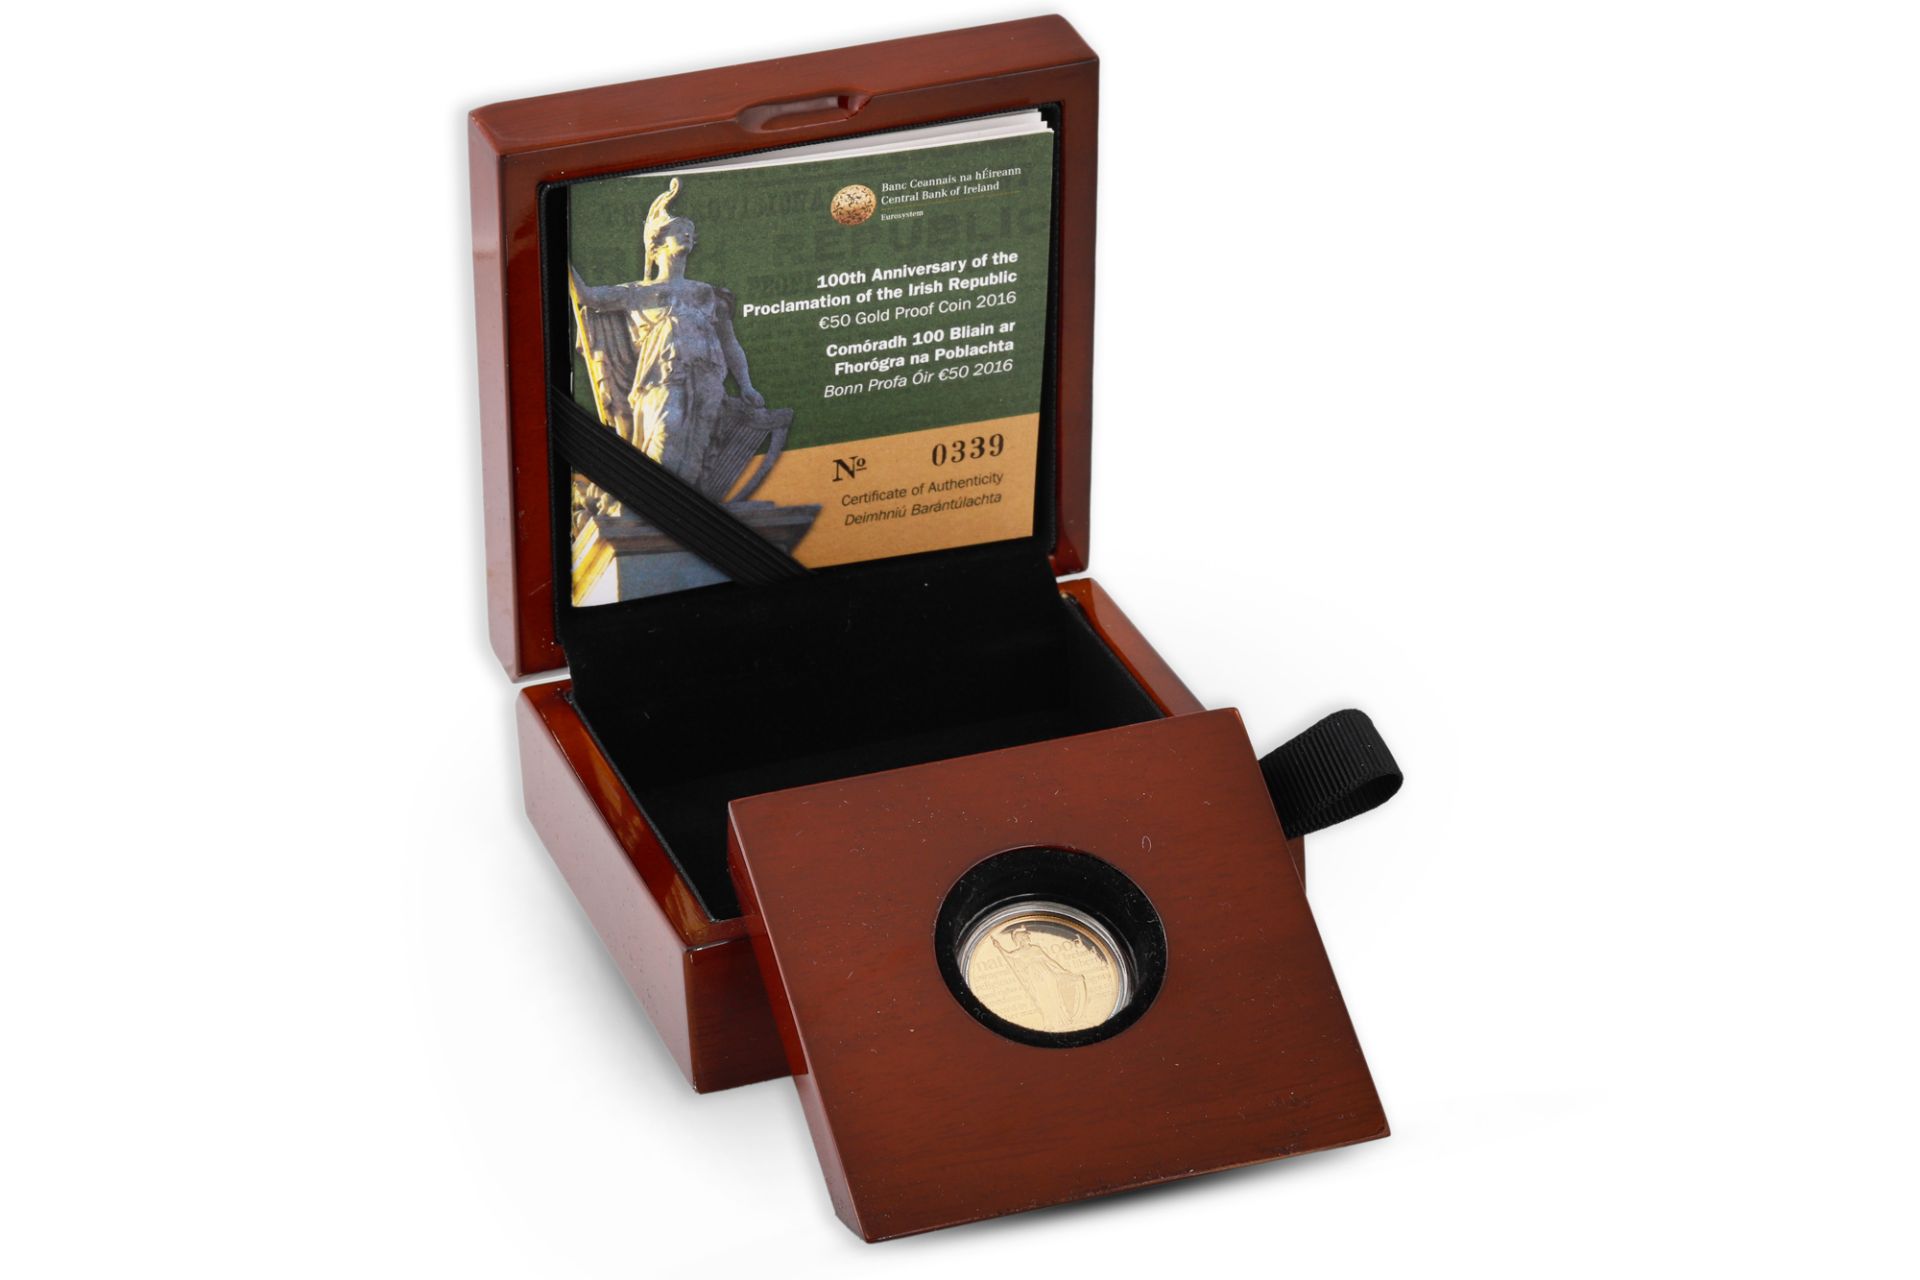 A 100TH ANNIVERSARY OF THE PROCLAMATION 50 EURO GOLD COIN, boxed